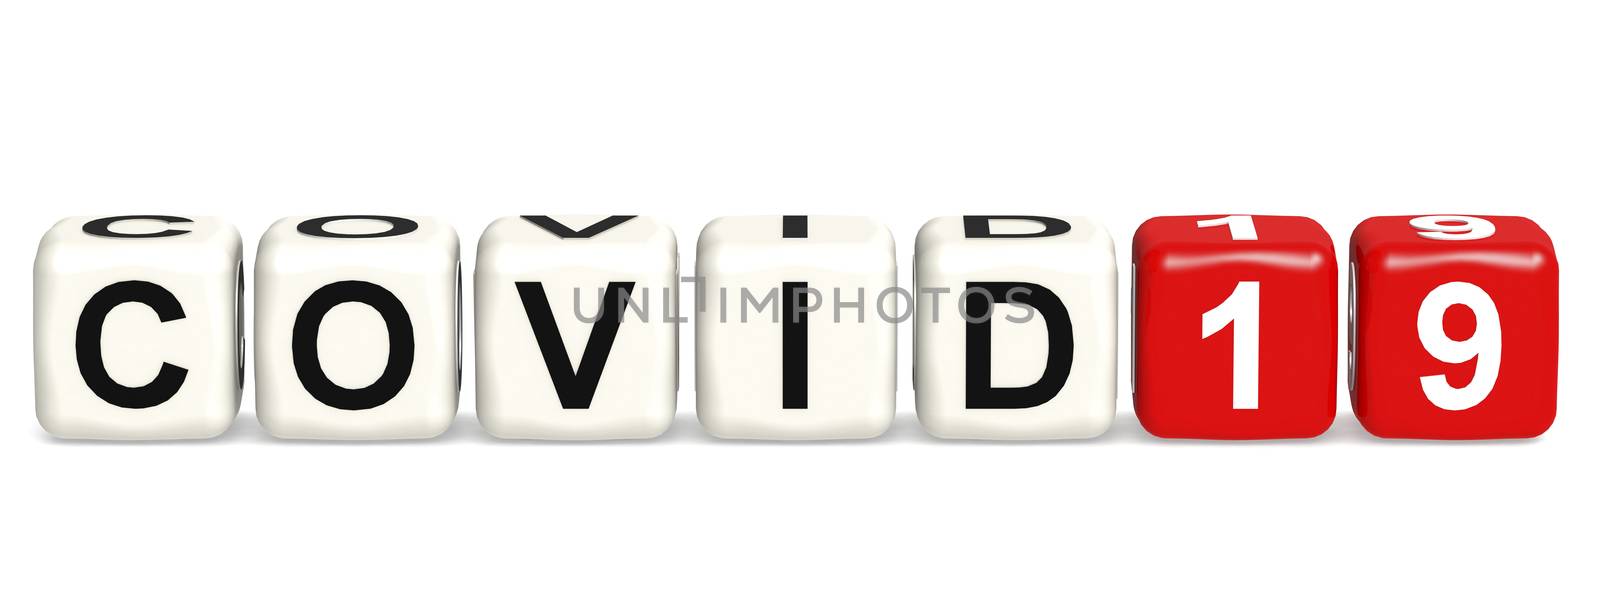 Covid19 word concept on cube block isolated, 3d rendering